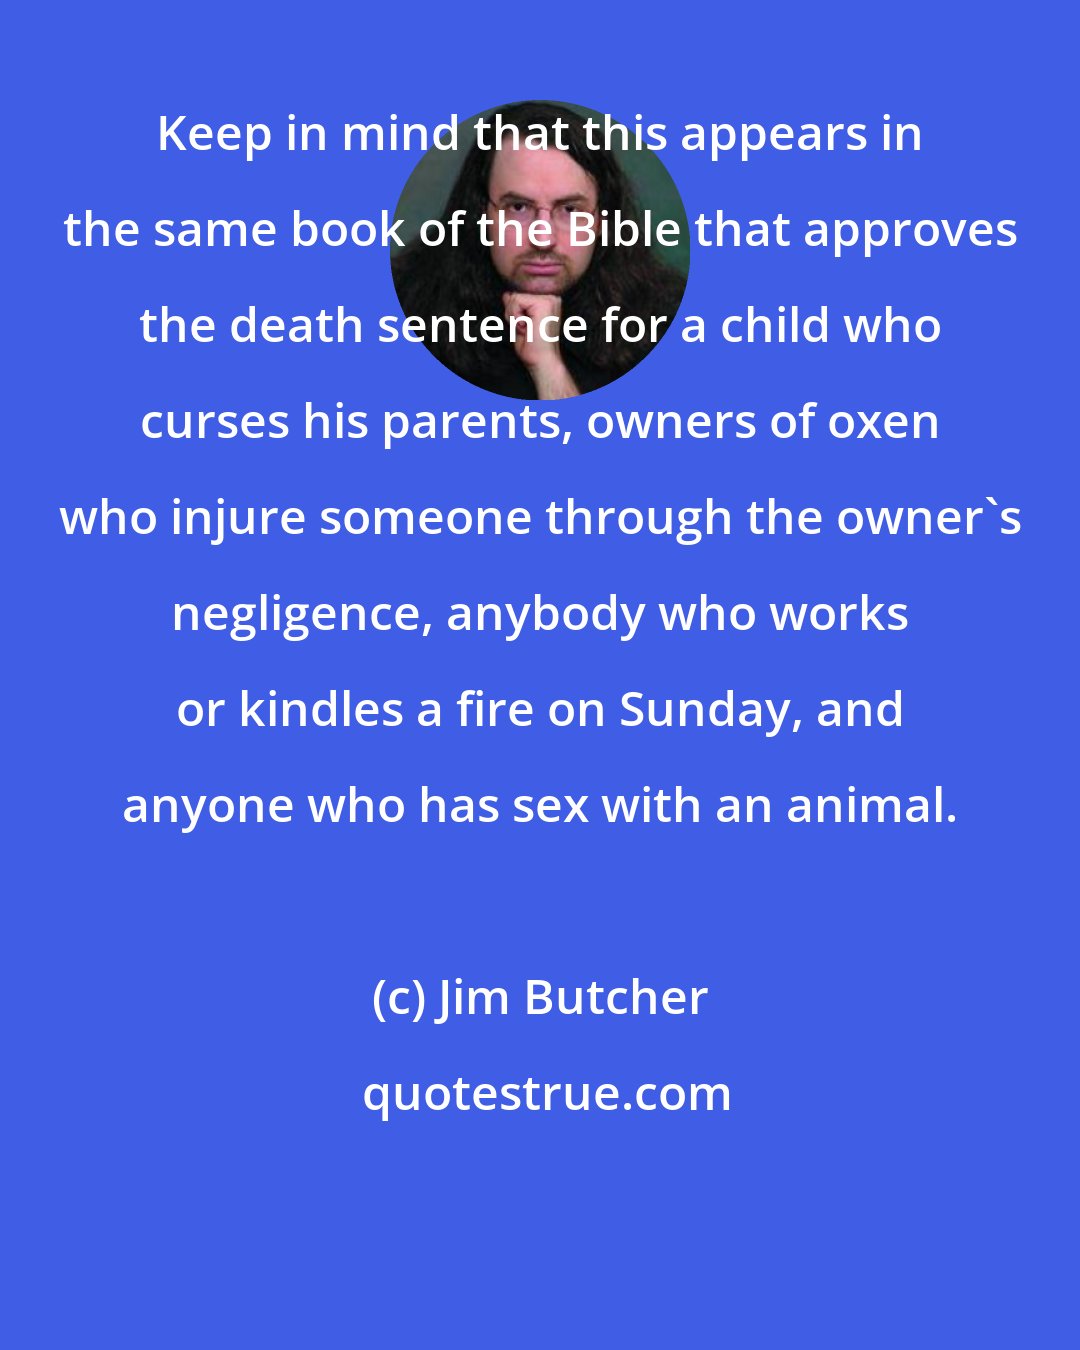 Jim Butcher: Keep in mind that this appears in the same book of the Bible that approves the death sentence for a child who curses his parents, owners of oxen who injure someone through the owner's negligence, anybody who works or kindles a fire on Sunday, and anyone who has sex with an animal.